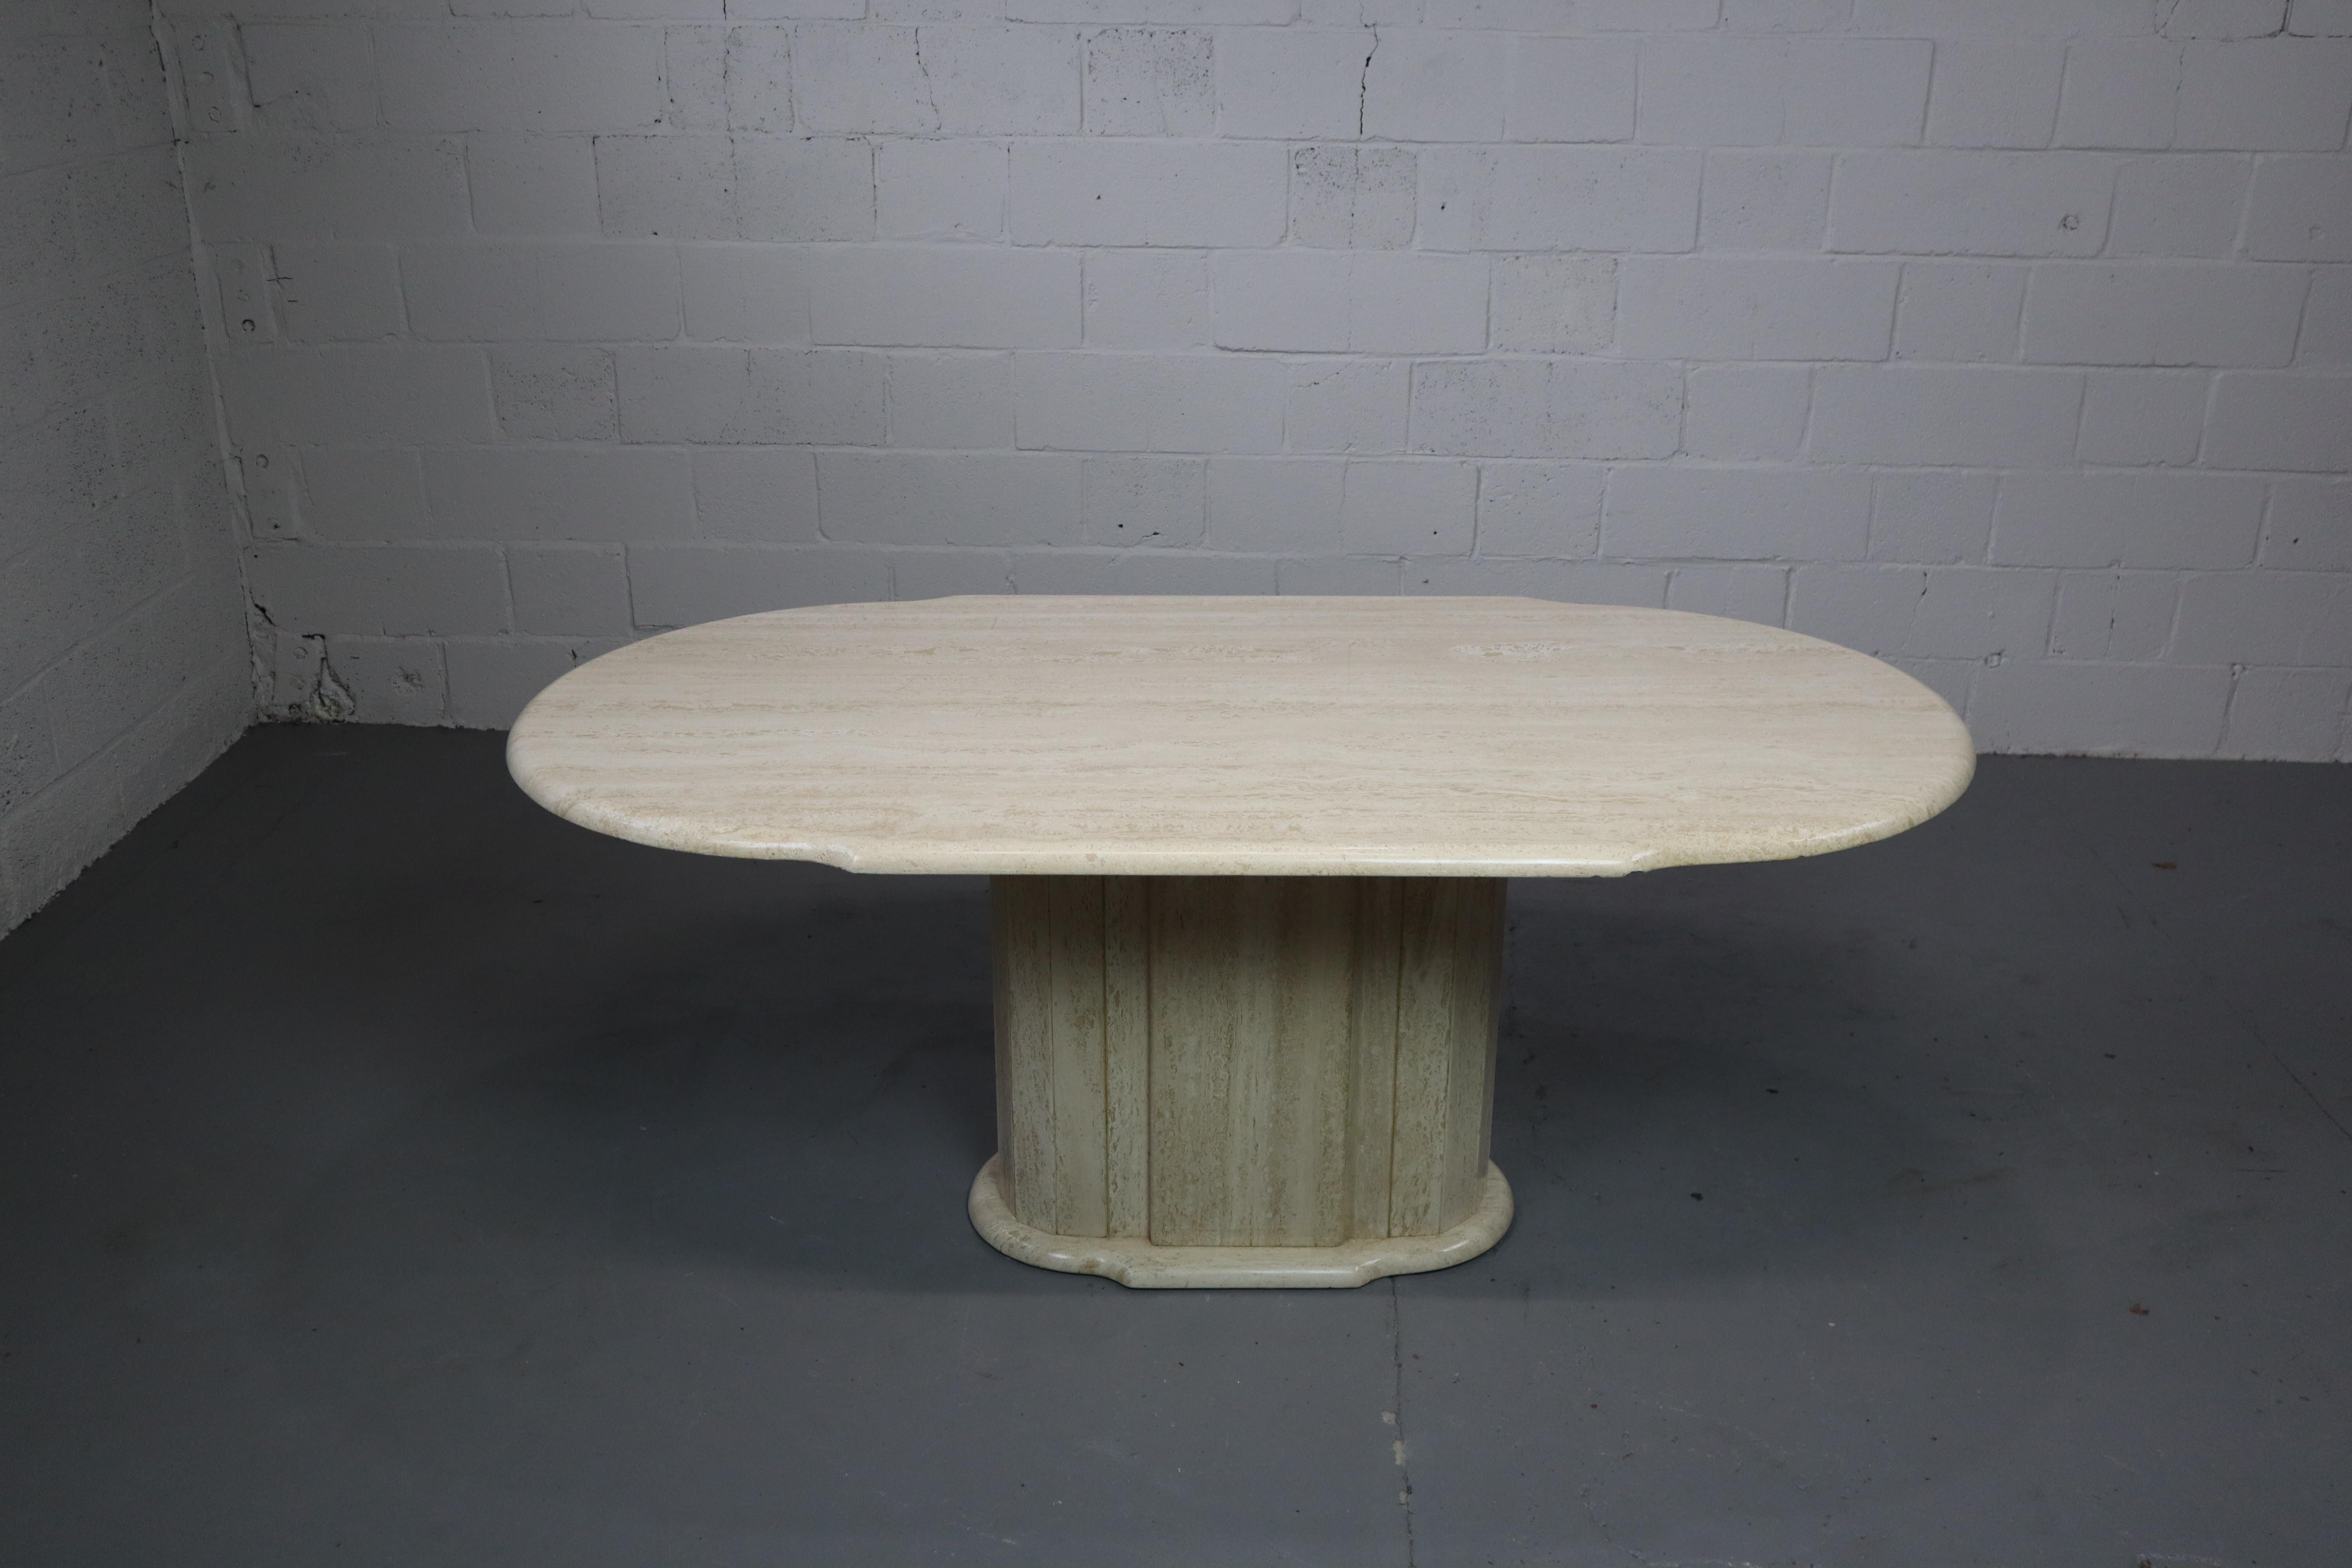 Travertine dining table with nice colour and pattern.

Fits in both a contemporary and a vintage interior

The table top is supported by a central column and steel cross. 